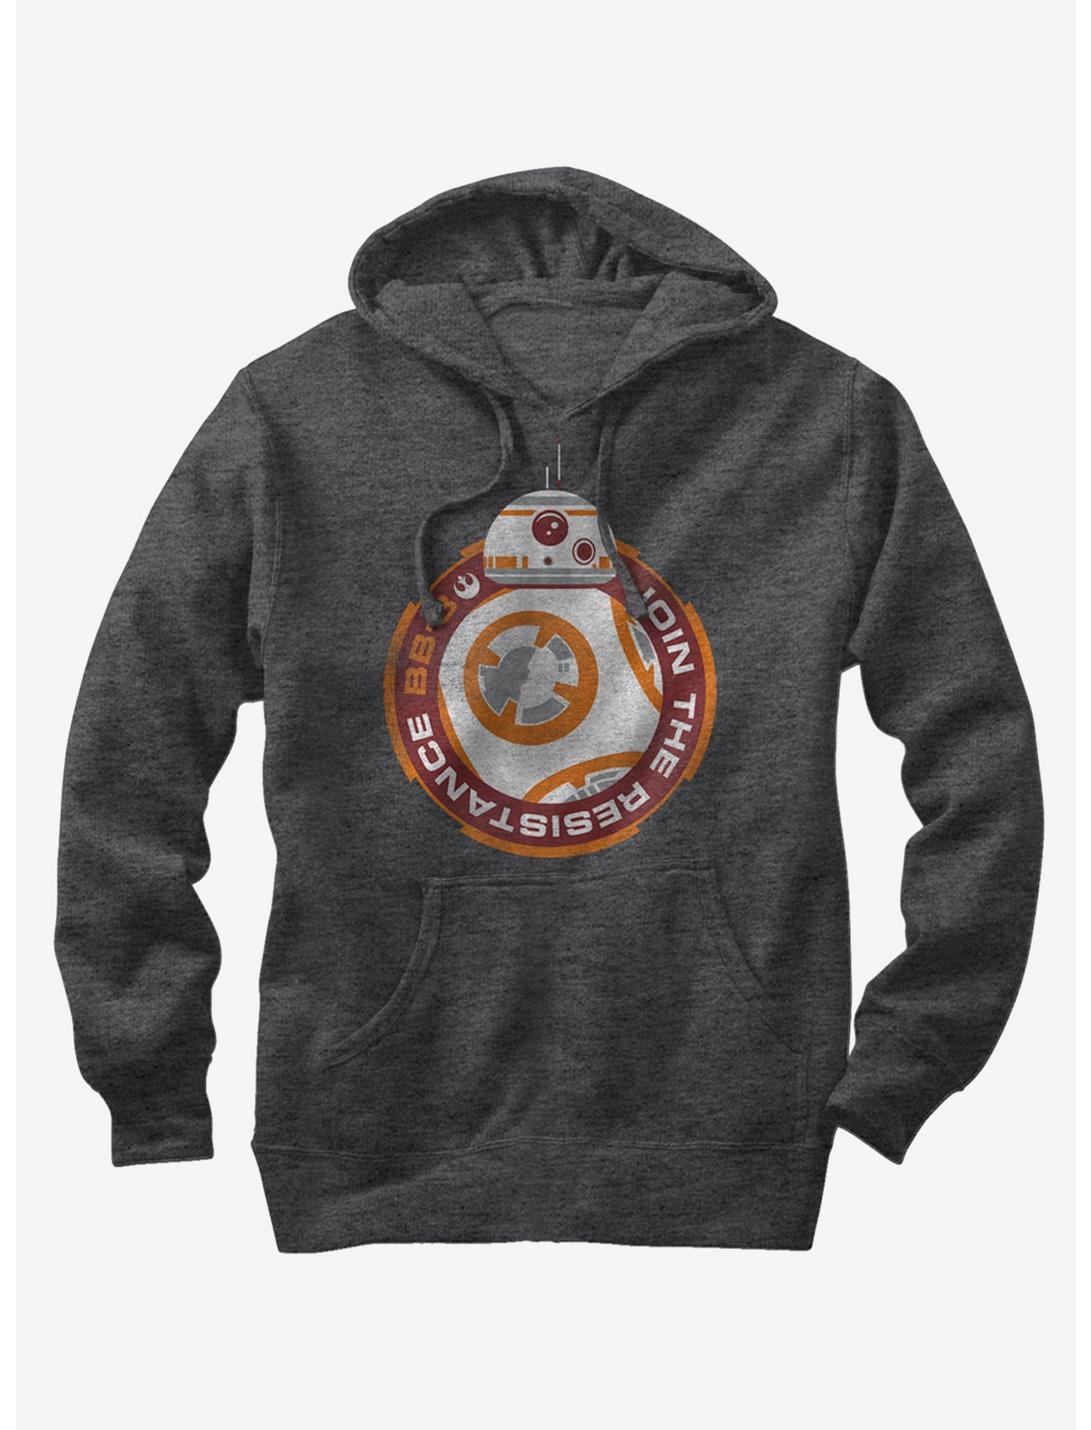 Star Wars BB-8 Join the Resistance Hoodie, CHAR HTR, hi-res